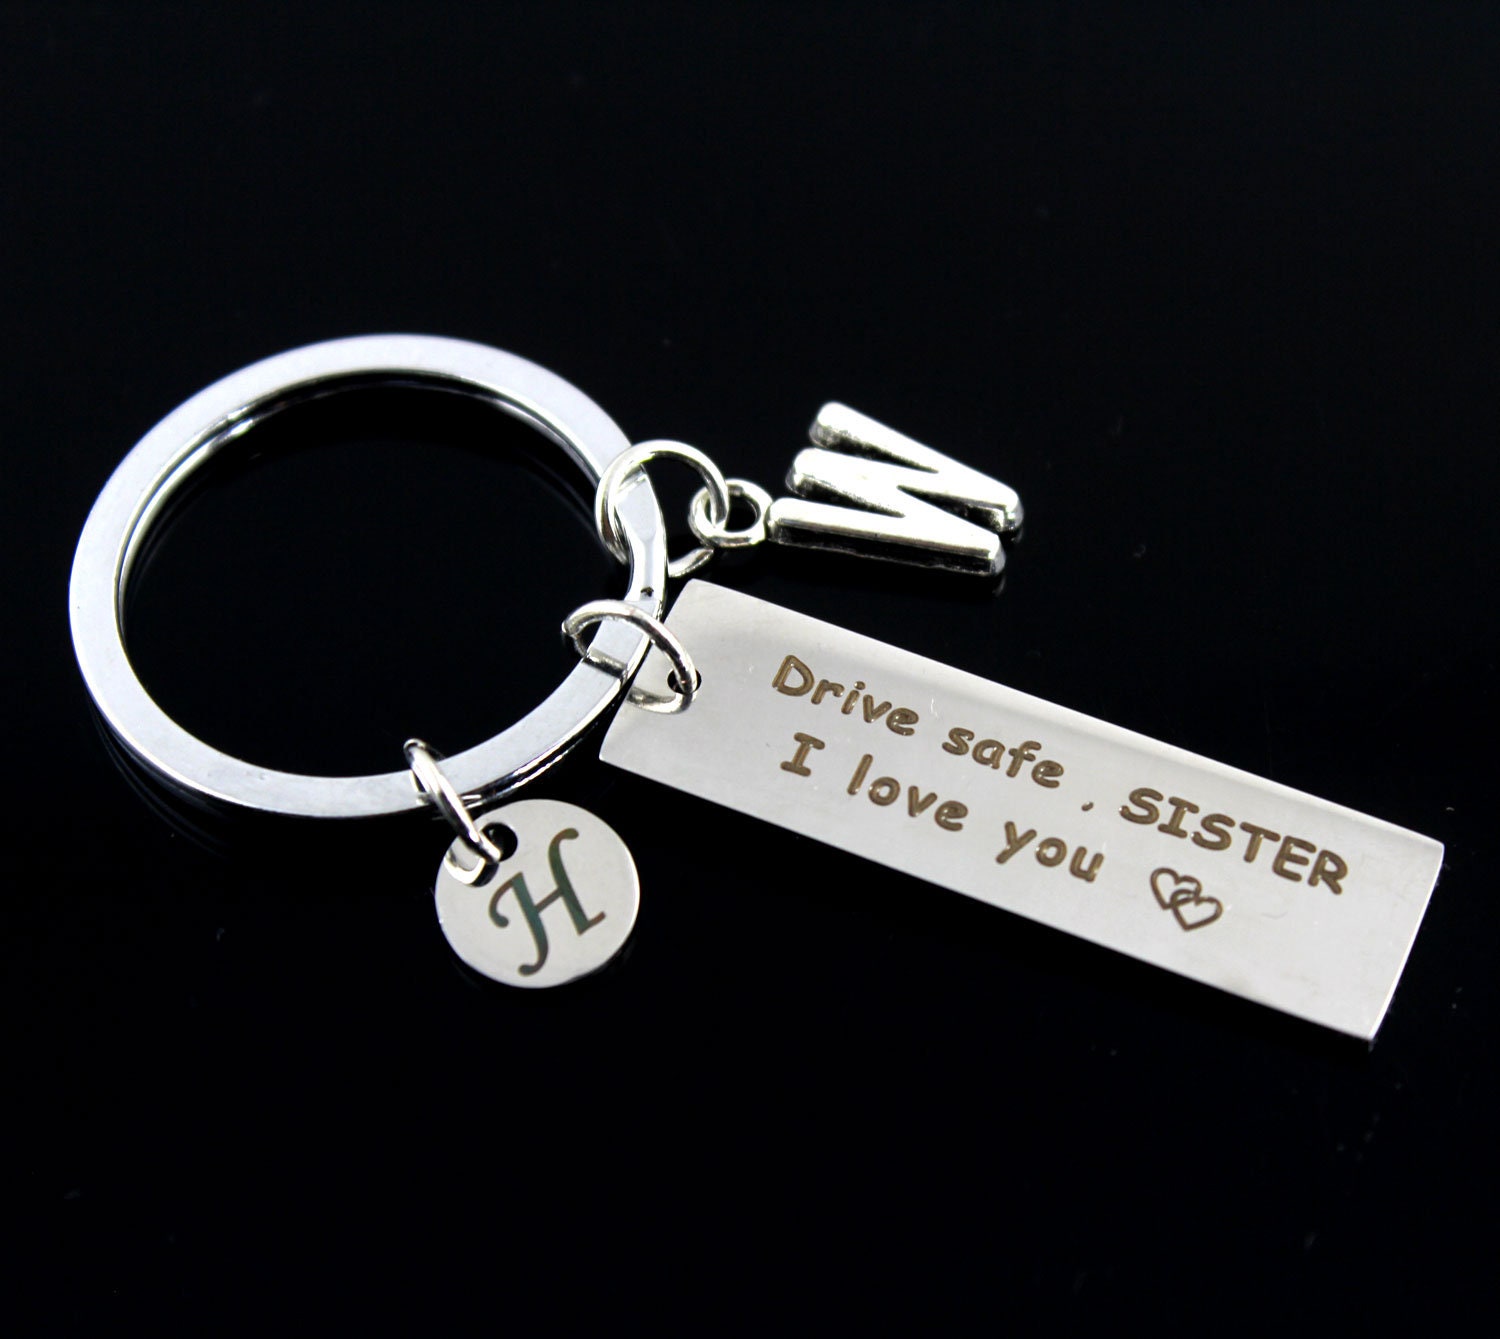 Drive Safe Sister, I Love You Keychain, Birthday Gift For Her, I Keychain, Stainless Steel Keychain